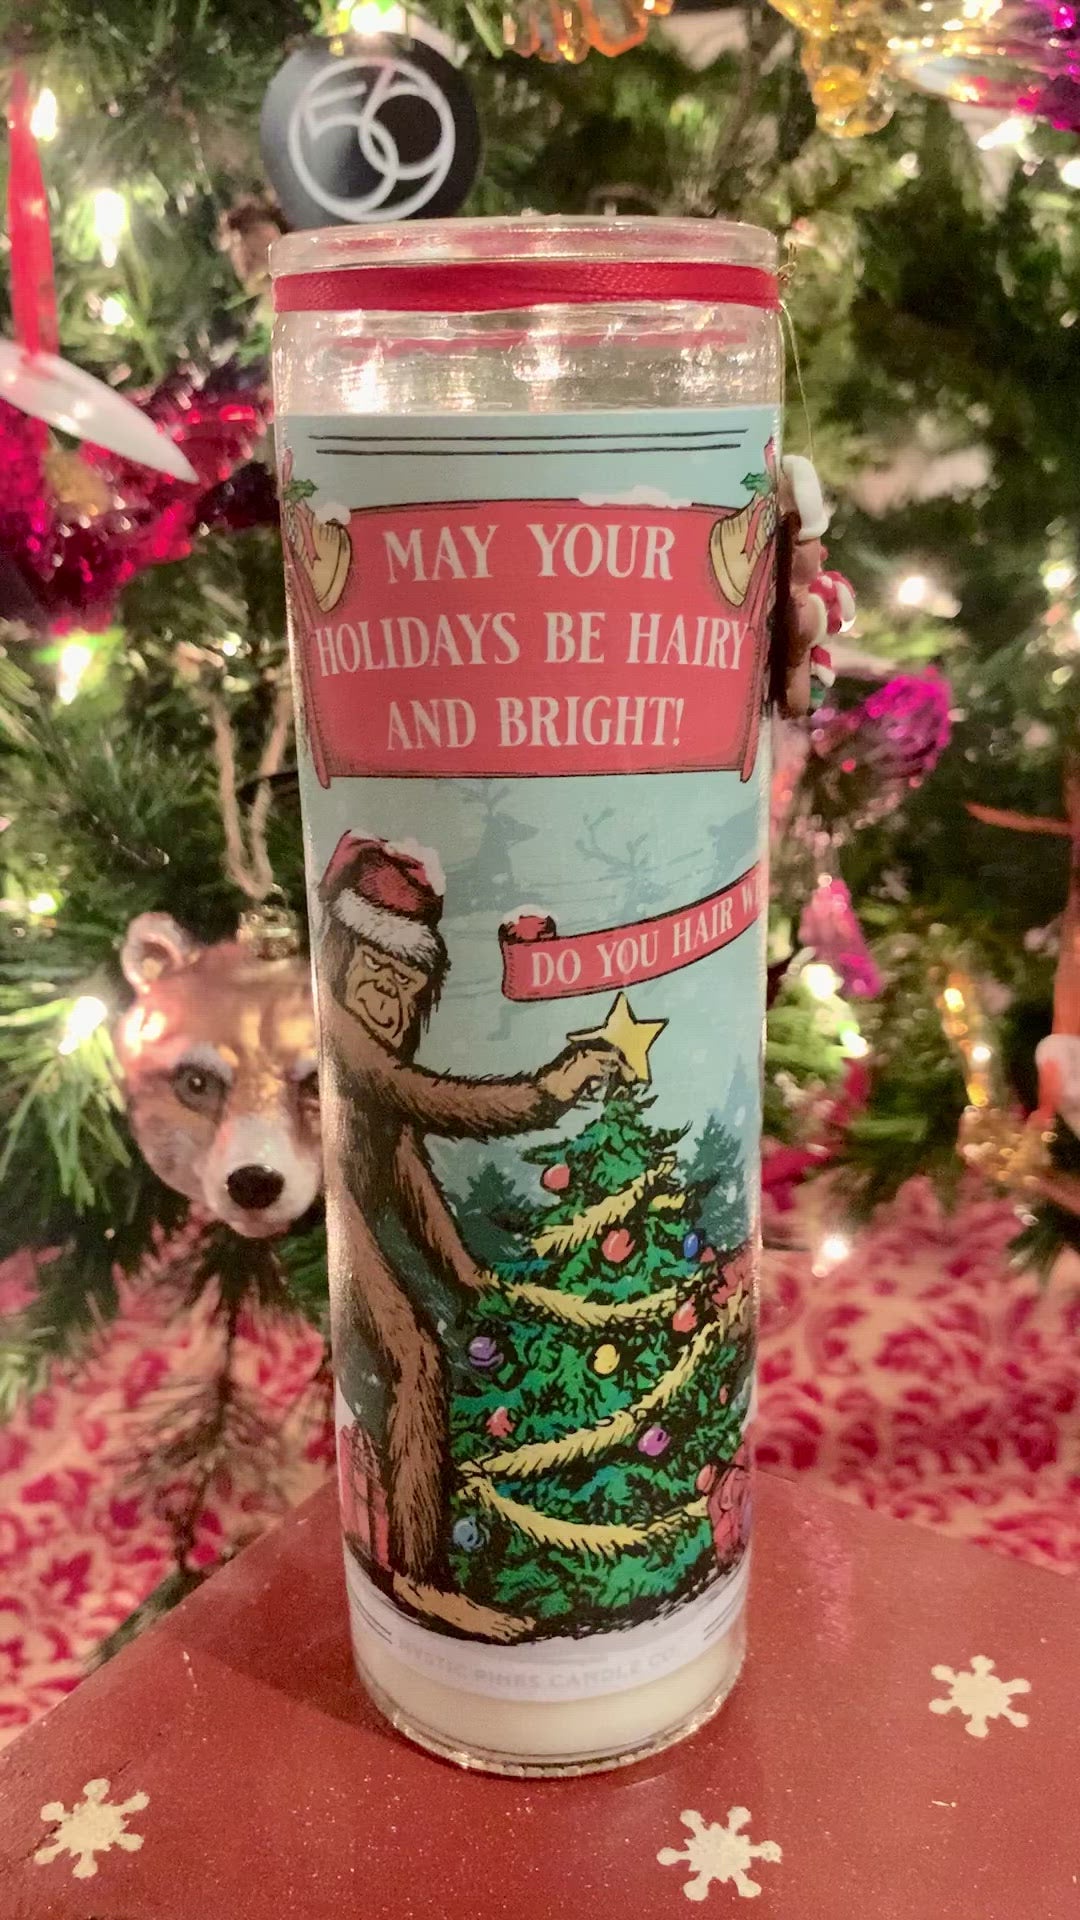 May Your Holidays Be Hairy and Bright